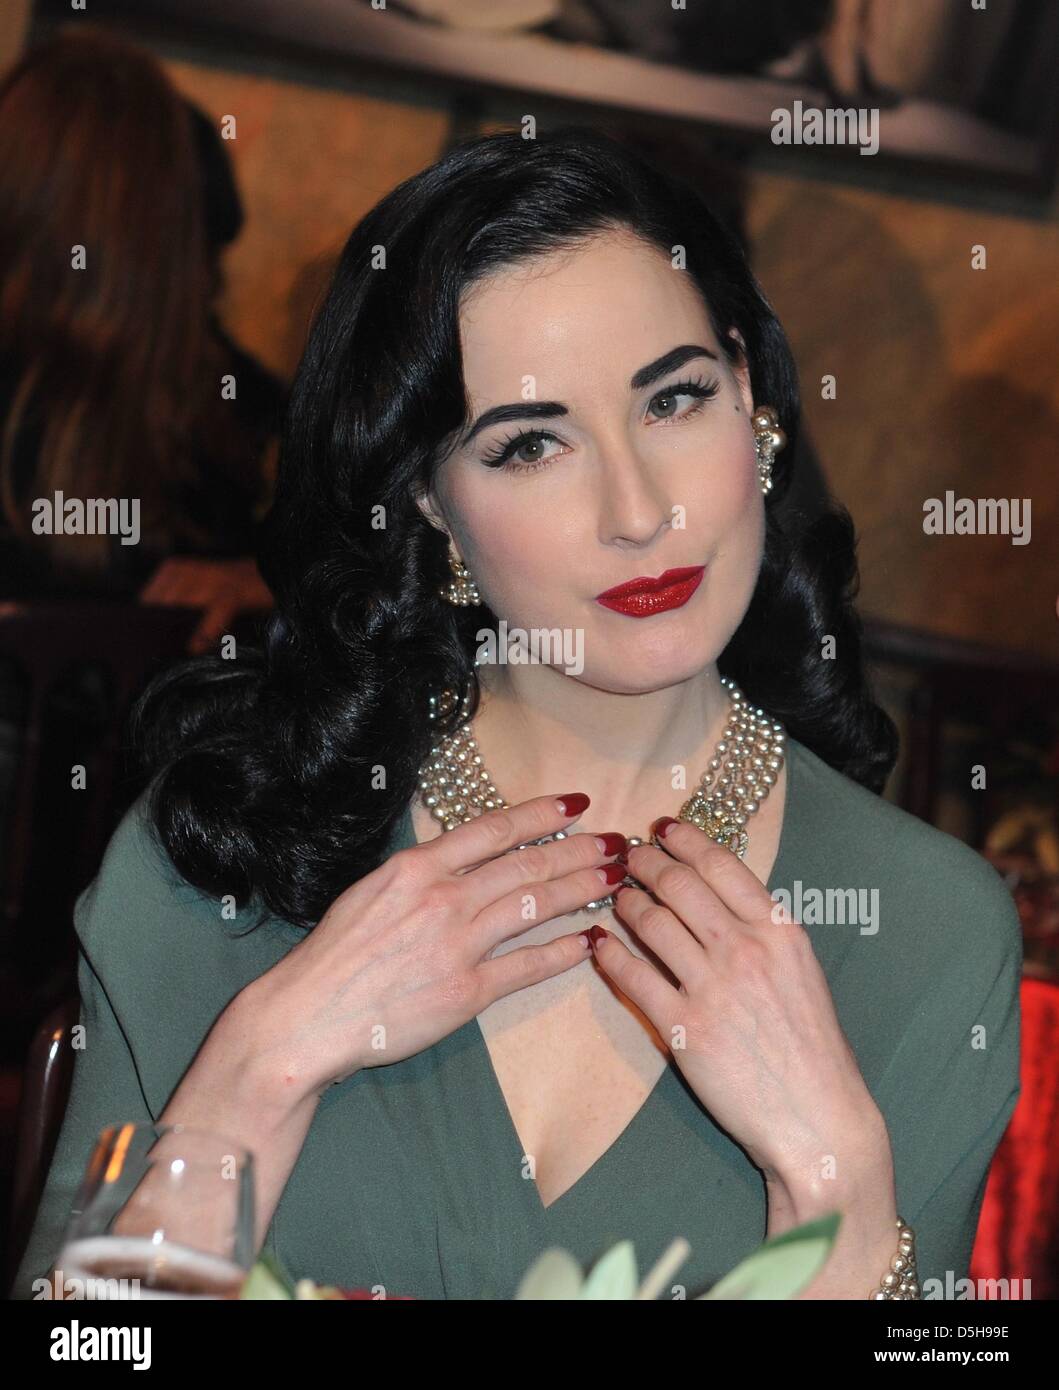 Burlesque dancer Dita von Teese takes part in the fashion show ''Lambertz Monday Night - Chocolate & Fashion'' at Old Waiting Room in Cologne, Germany, 01 Febuary 2010. This party of confectionary manufacturer Lambertz took place traditionally on the occaision of the International Confectionary Fair. Photo: Joerg Carstensen Stock Photo